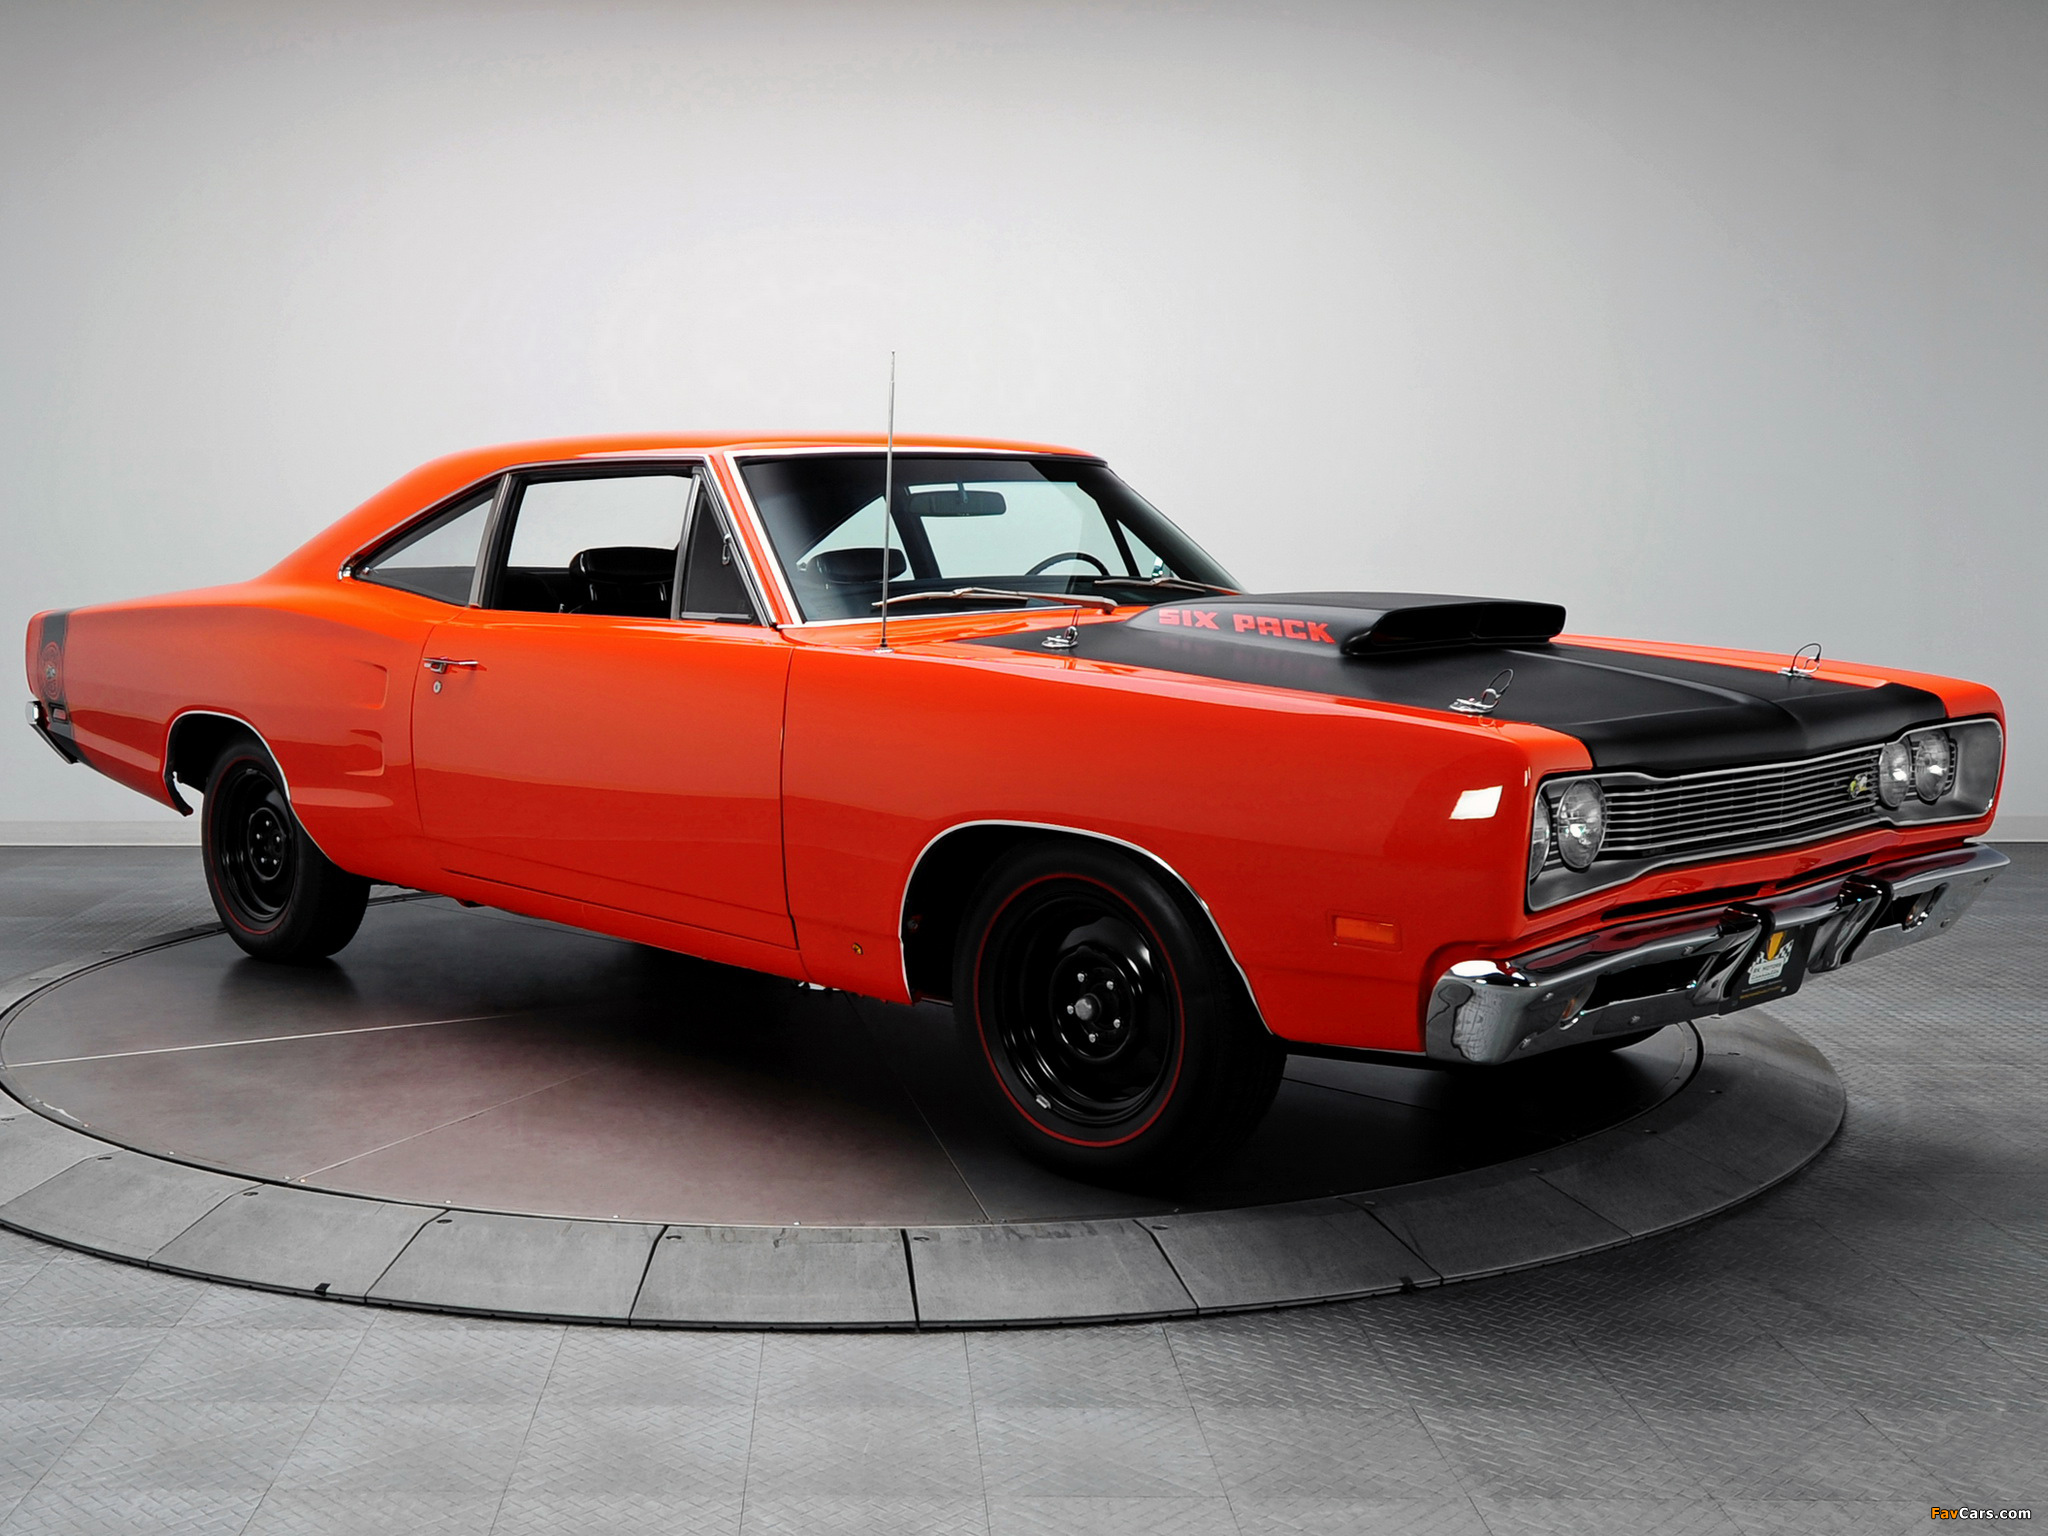 Dodge Coronet Super Bee 440 Six Pack Coupe 1969 Wallpapers - Mustang 71 Mach One - HD Wallpaper 